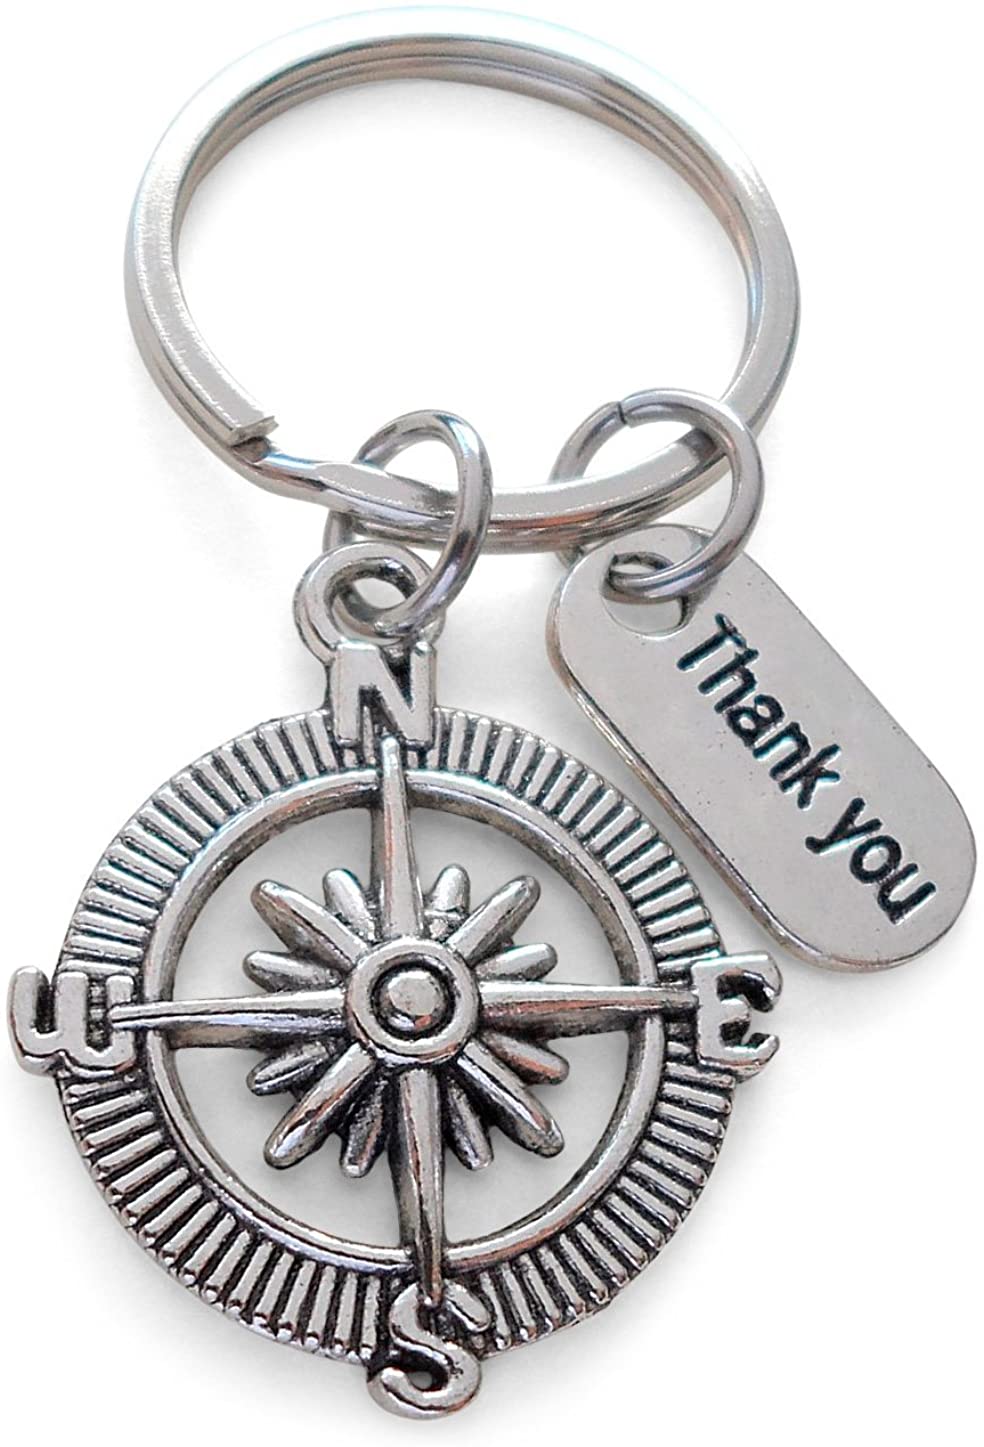 Employee Appreciation Gifts • "Thank You" Tag & Silver Compass Keychain by JewelryEveryday w/ "We'd be lost with out you!" Card